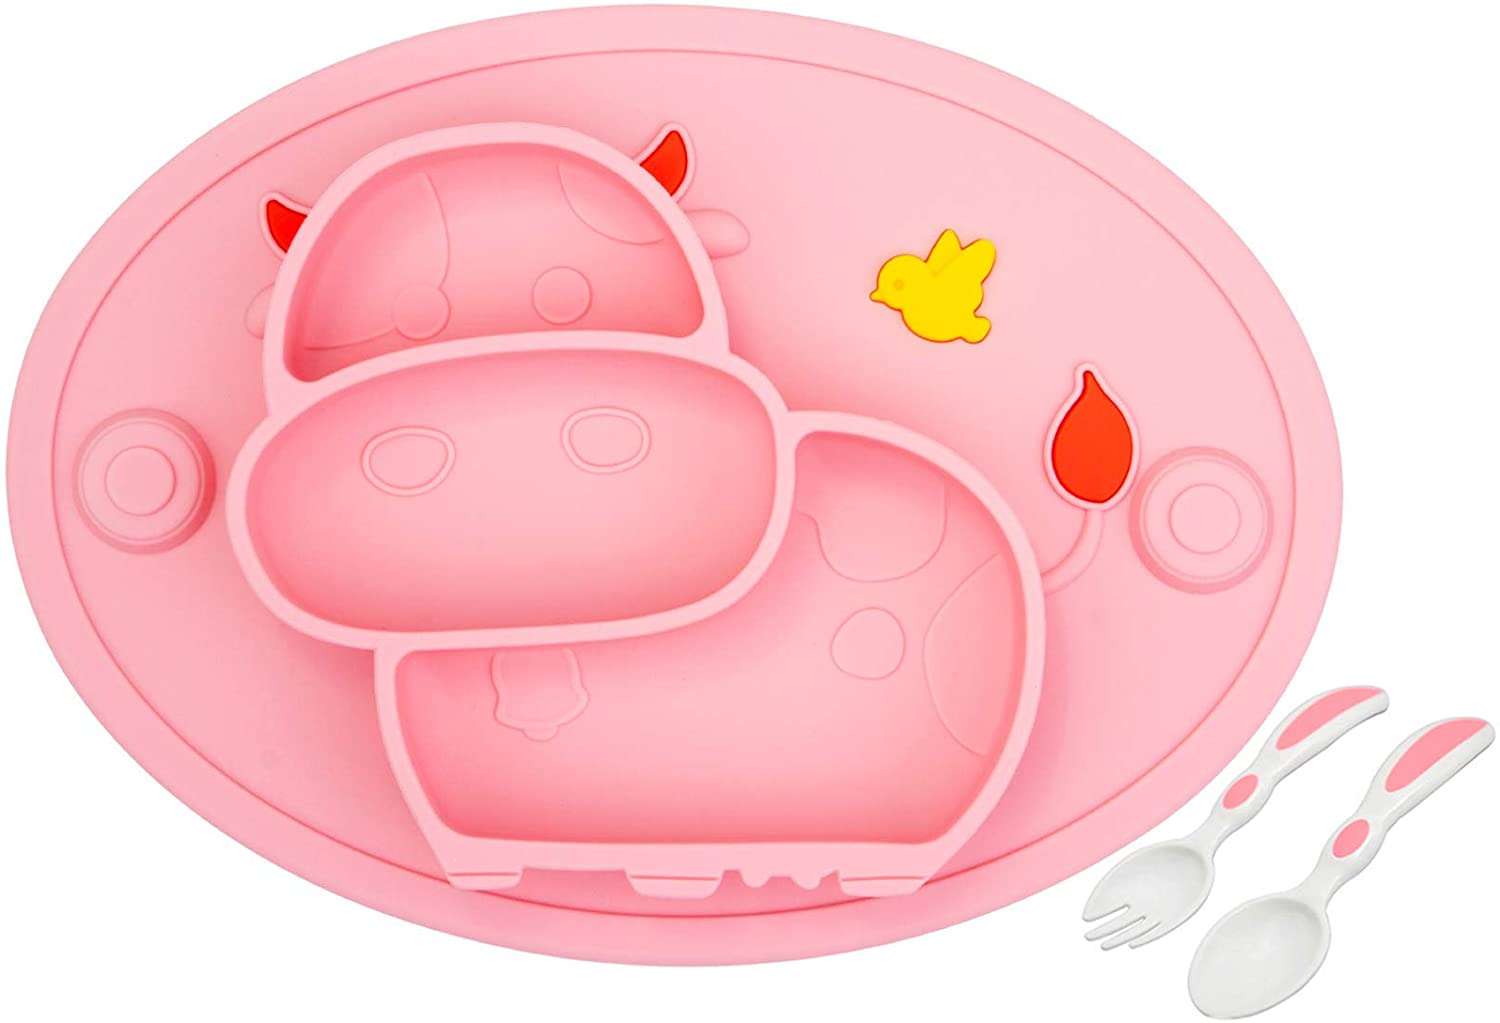 Baby Silicone Placemat, Non-Slip Feeding Suction Plate for Toddlers Babies Kids Fits Most Highchair Trays - e4cents